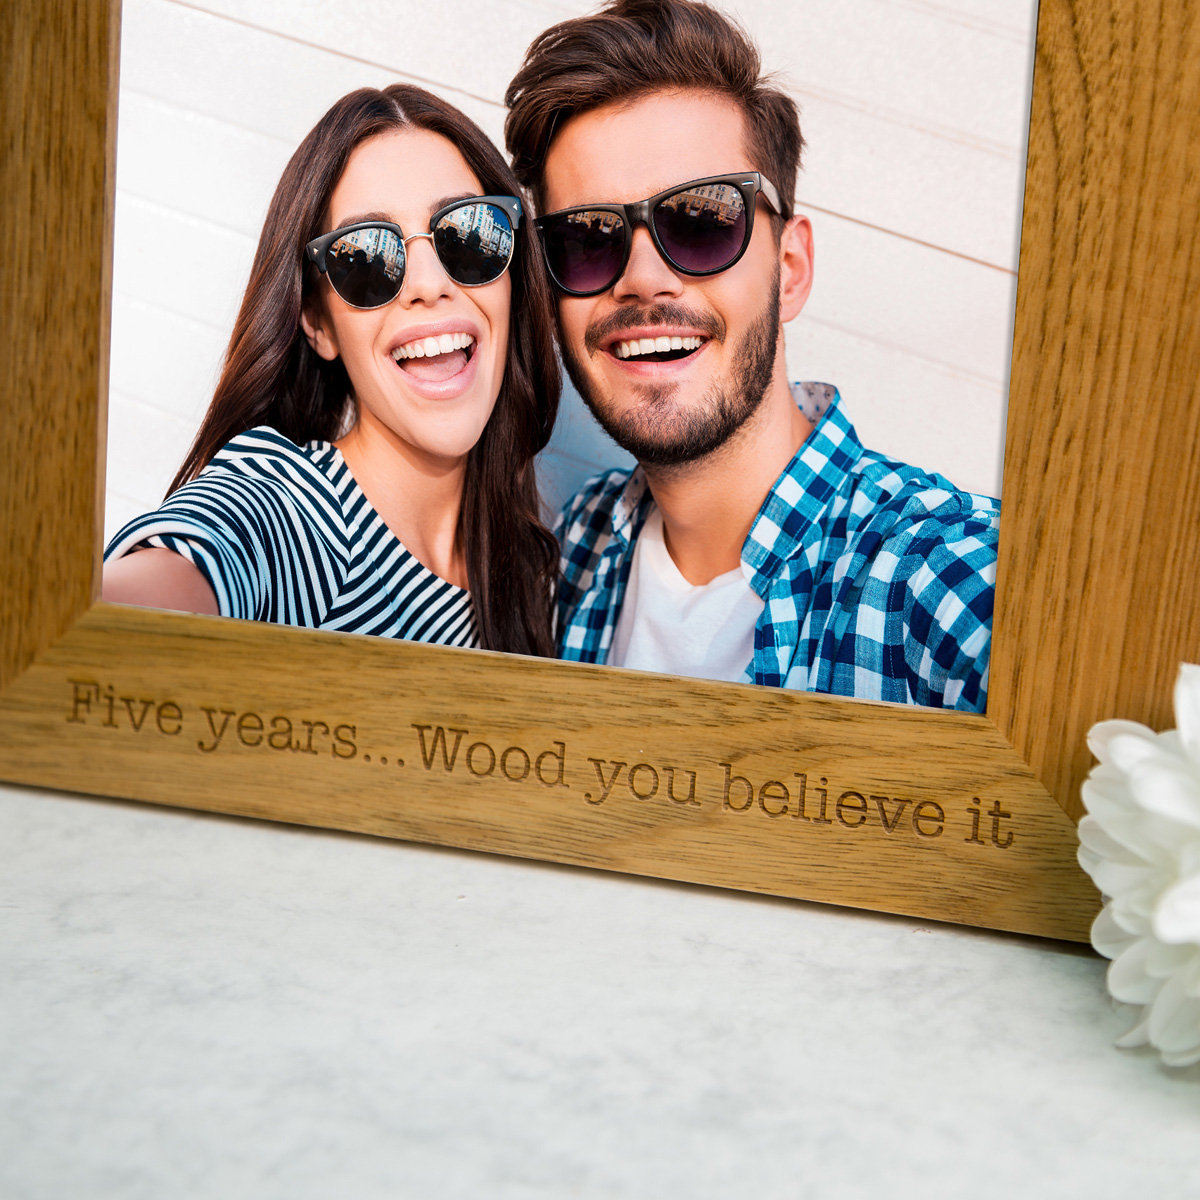 Personalised Wooden Photo Frame - Five Years, Wood You Believe It